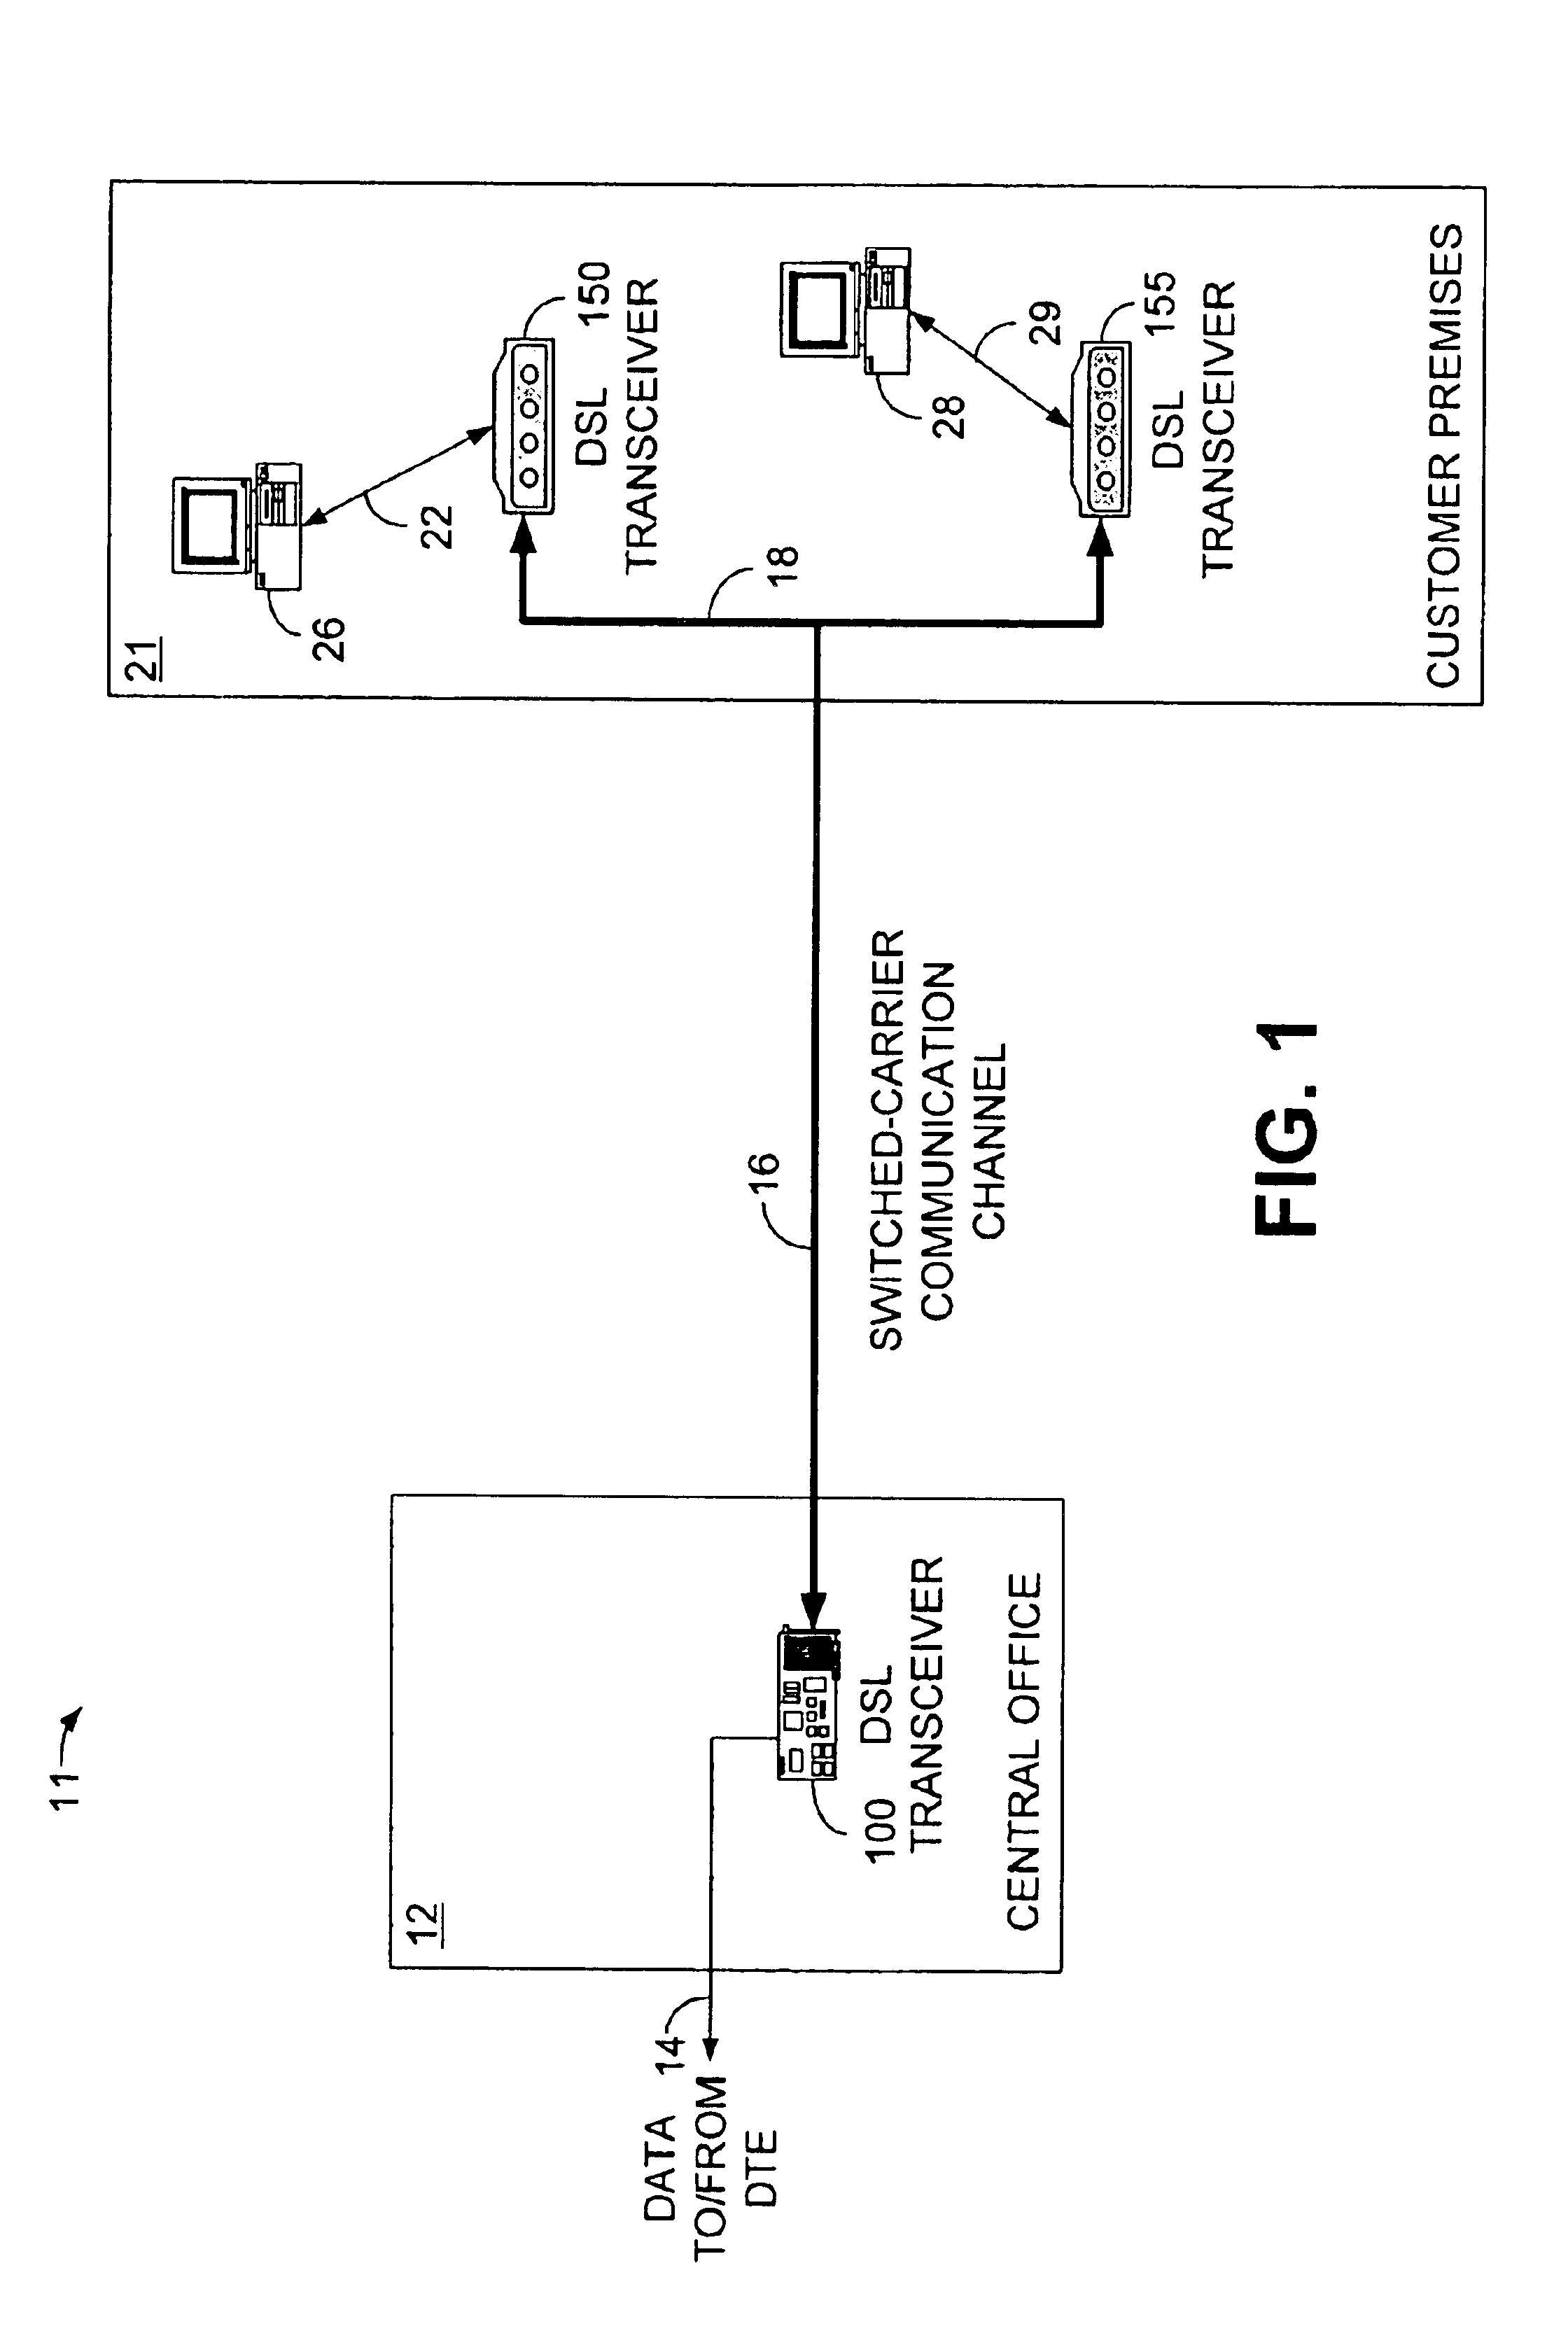 System and method for a robust preamble and transmission delimiting in a switched-carrier transceiver